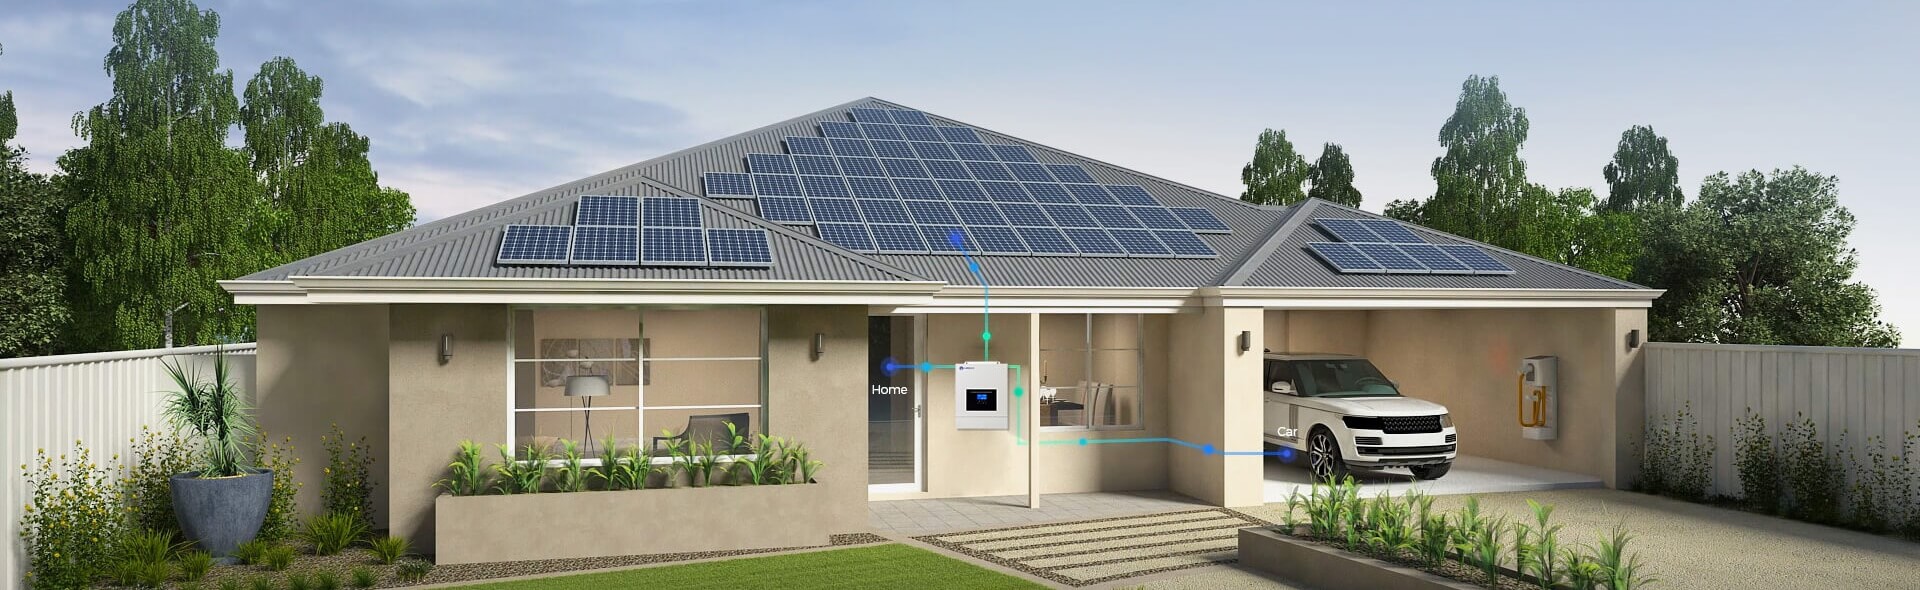 Wall-mounted home energy storage